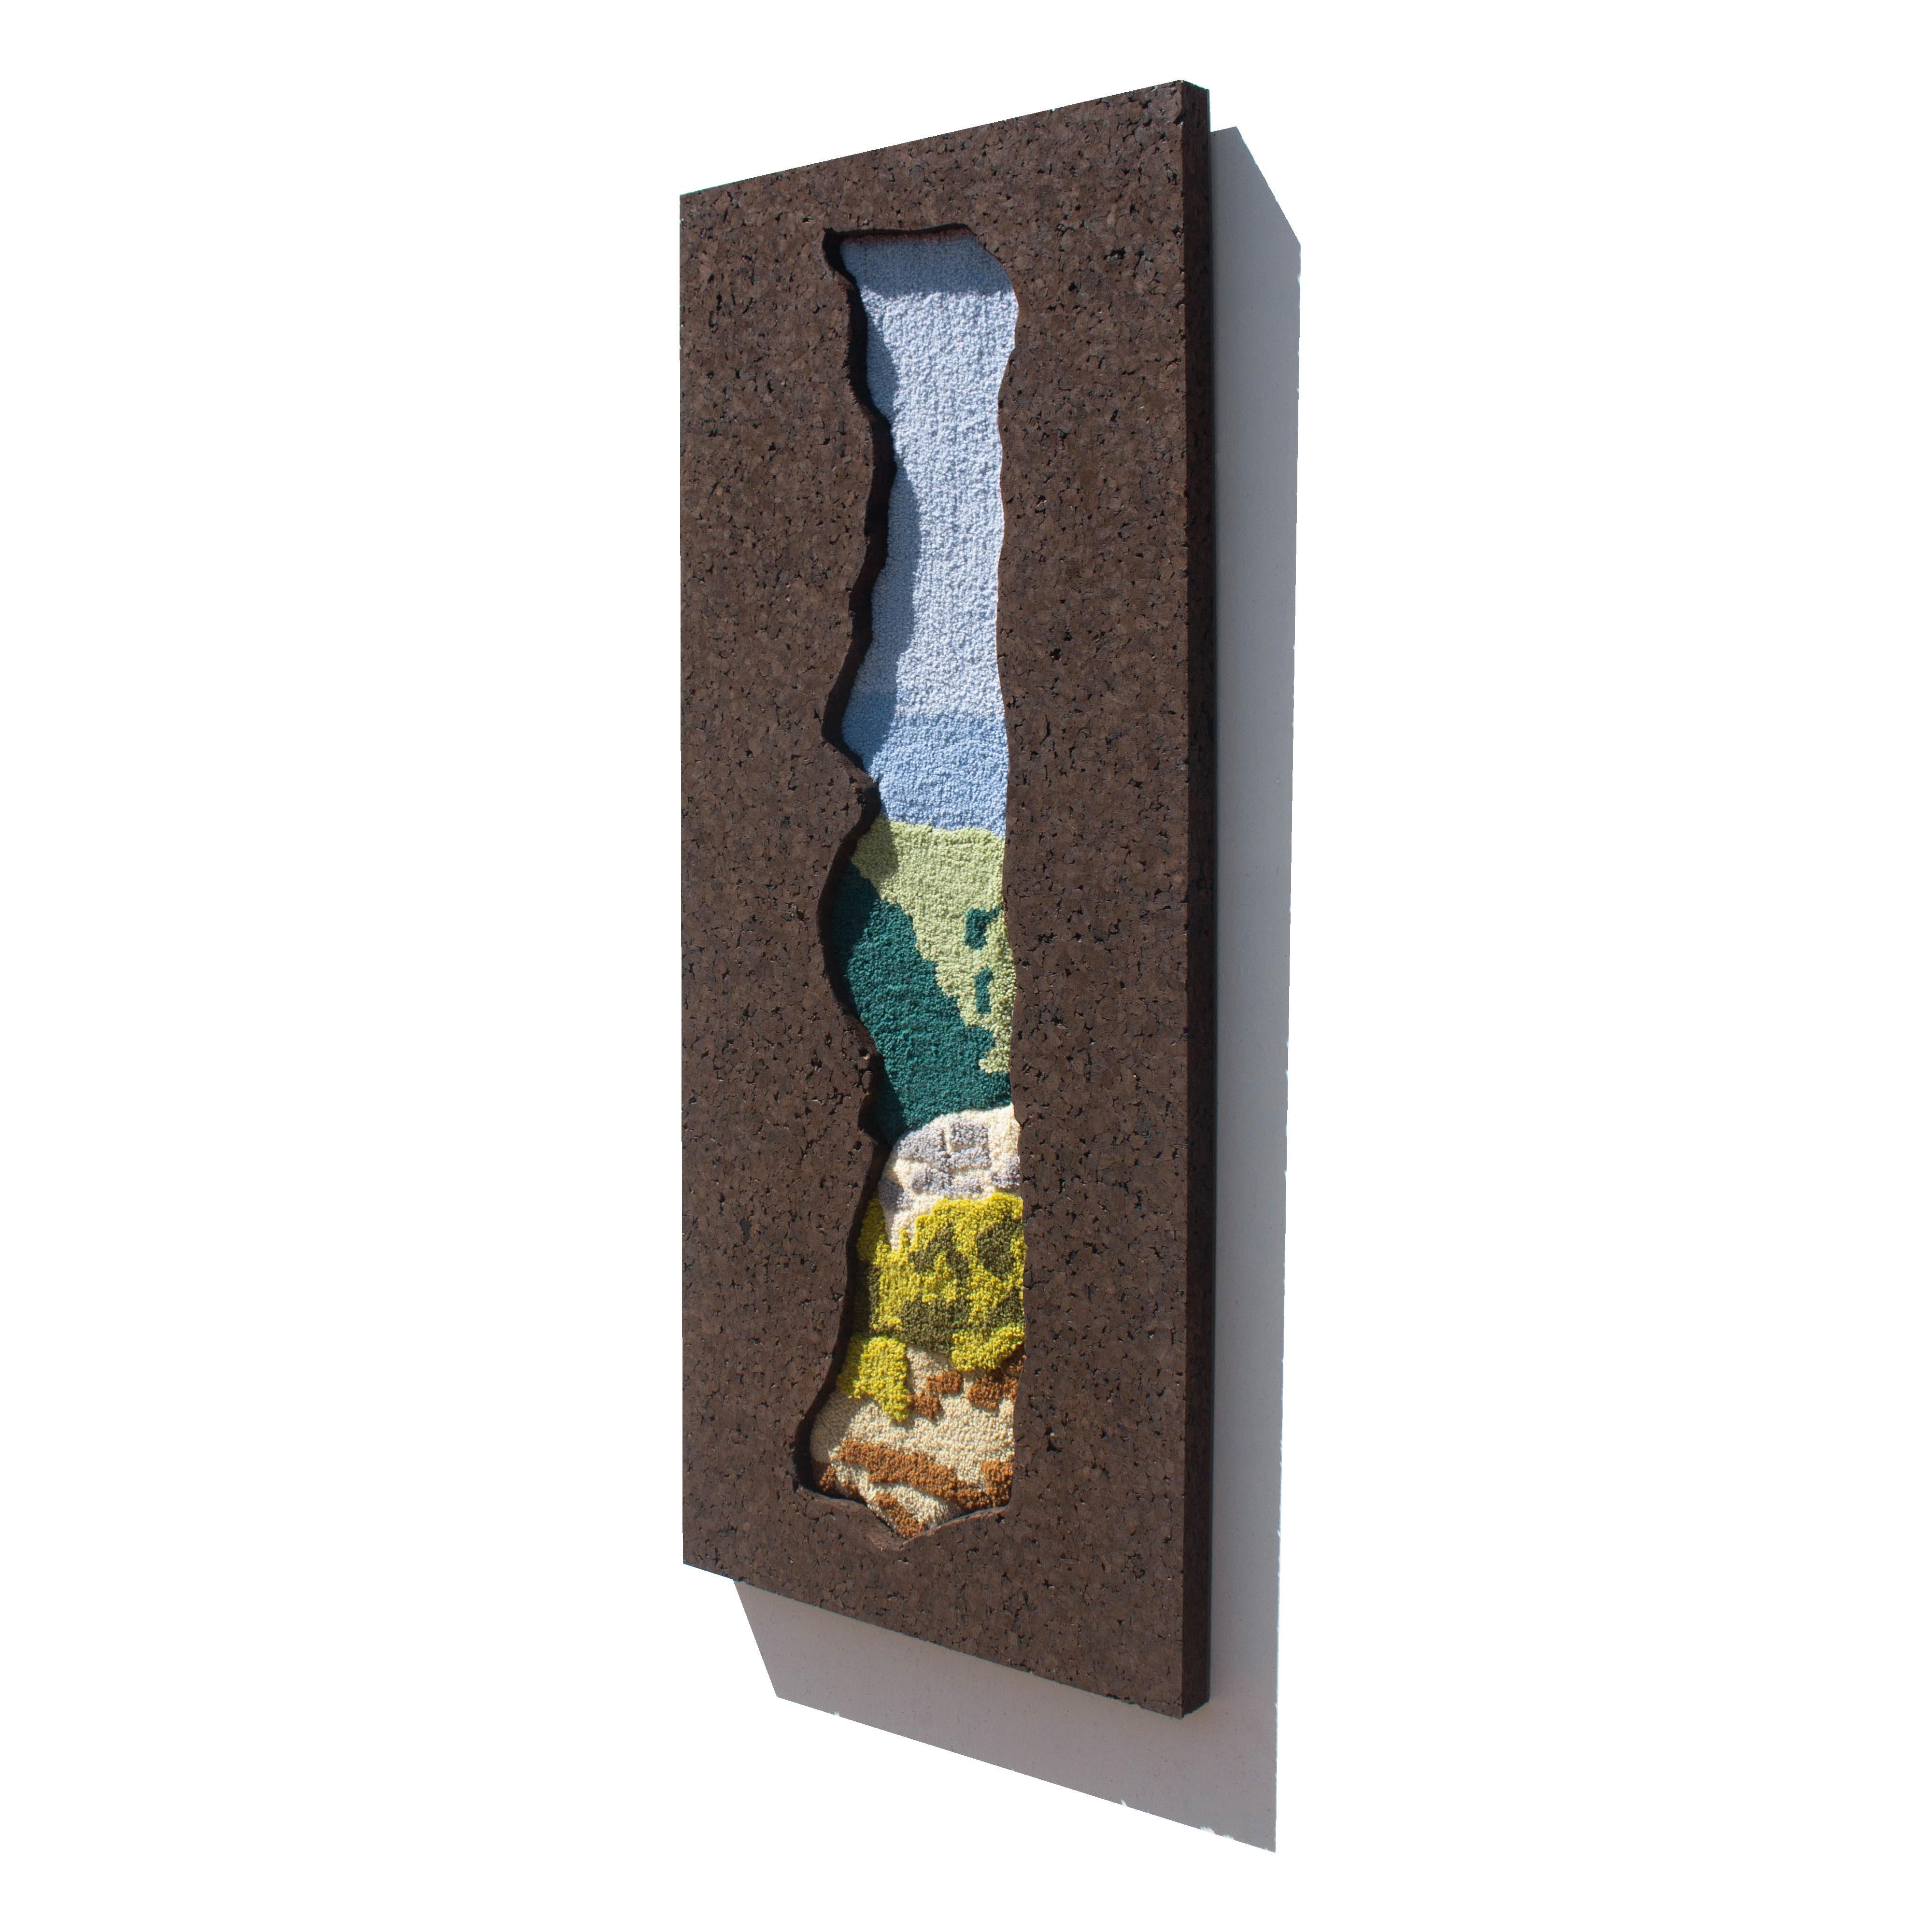 Handmade Contemporary Wool Wall Tapestry, Portuguese Landscape, Black Cork Frame In New Condition For Sale In Almada, PT